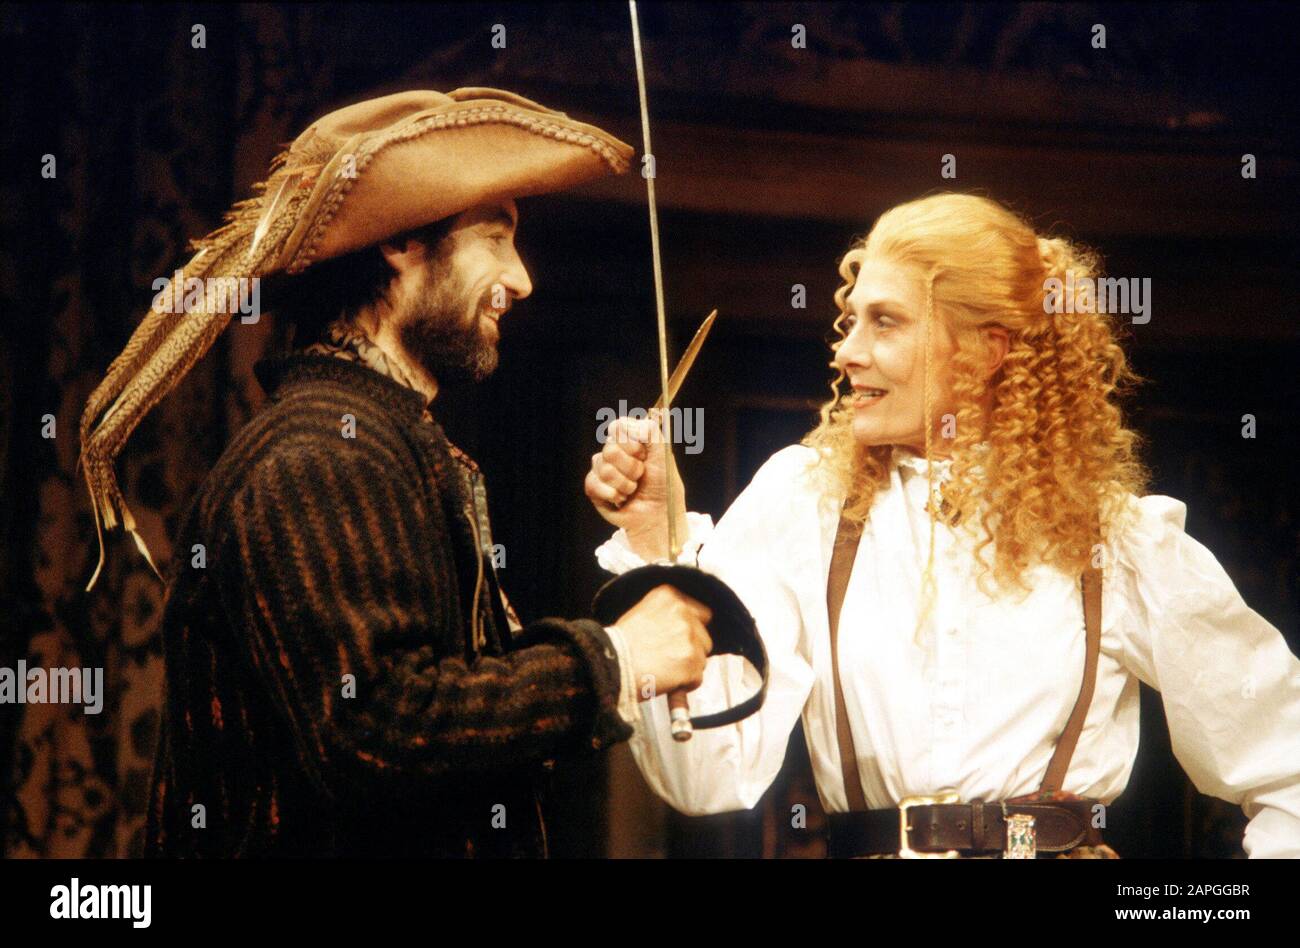 Timothy Dalton (Petruchio) and Vanessa Redgrave (Katherina) in THE TAMING OF THE SHREW by Shakespeare directed by Toby Robertson at the Theatre Royal Haymarket, London in 1986. Vanessa Redgrave, actress and political activist, born in London in 1937. Awarded CBE in 1967. In a long-term relationship with Timothy Dalton from 1971 to 1986. Stock Photo